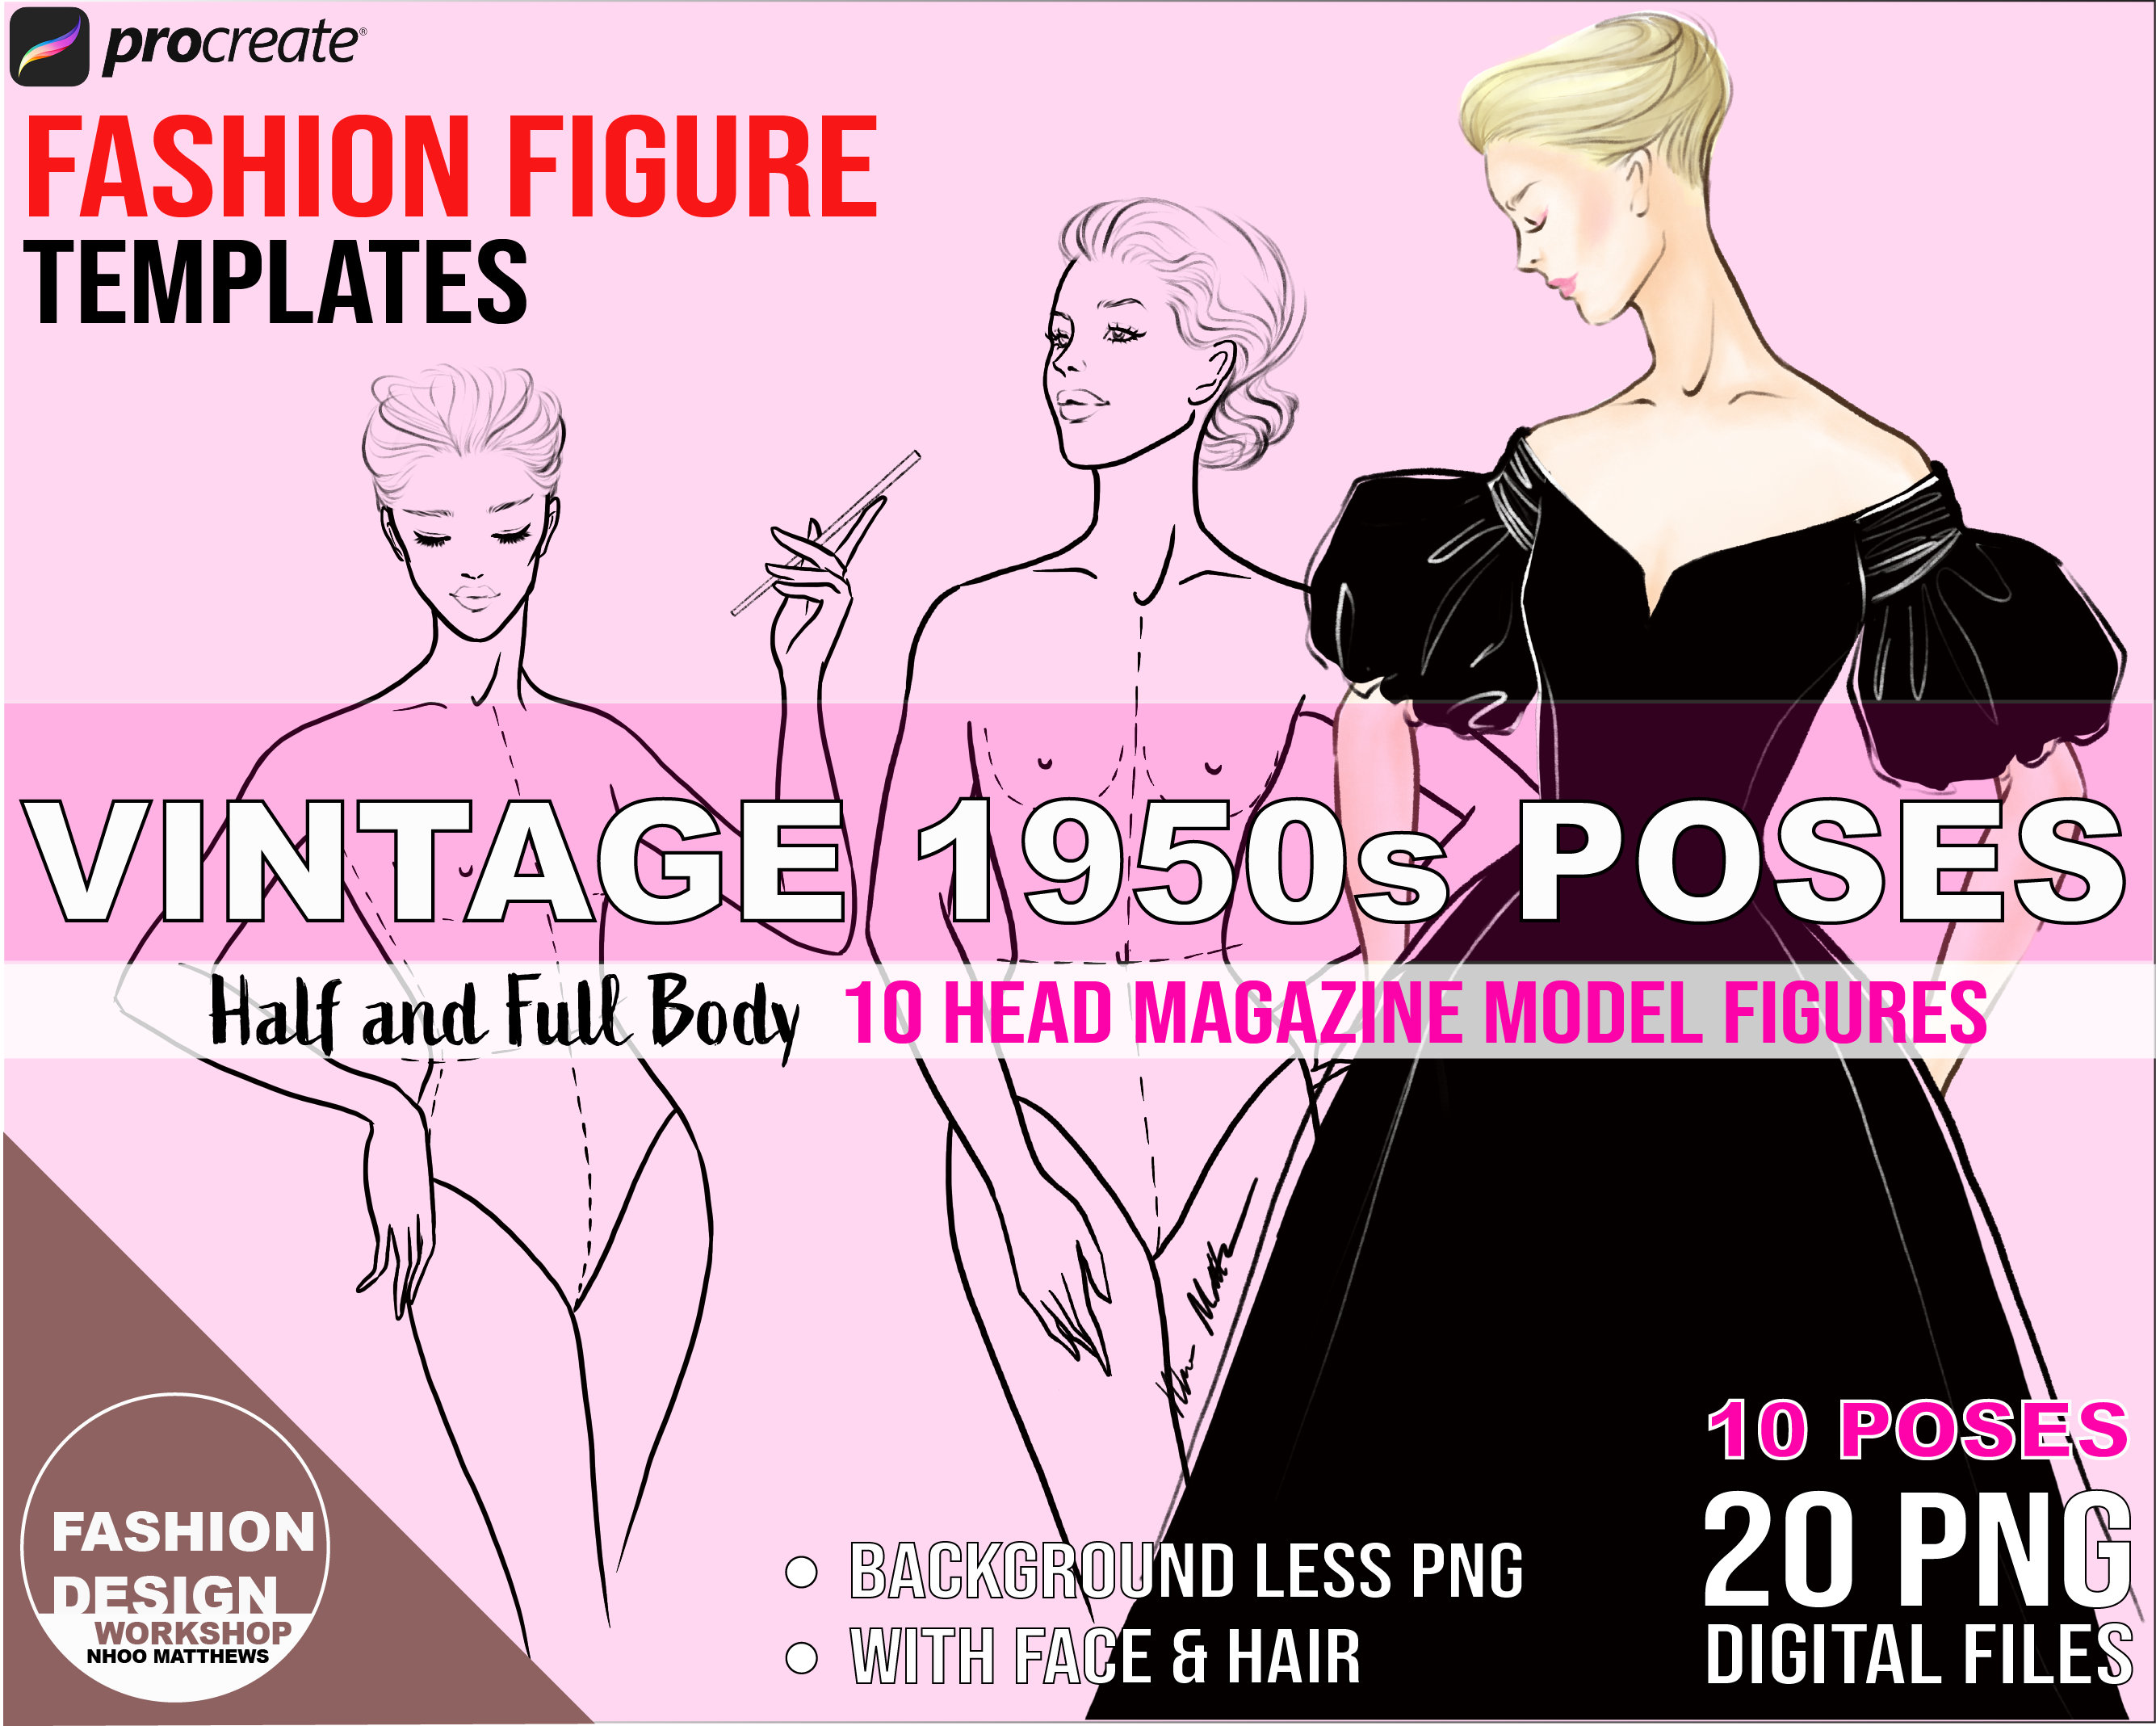 Retro girl outfit Design Template